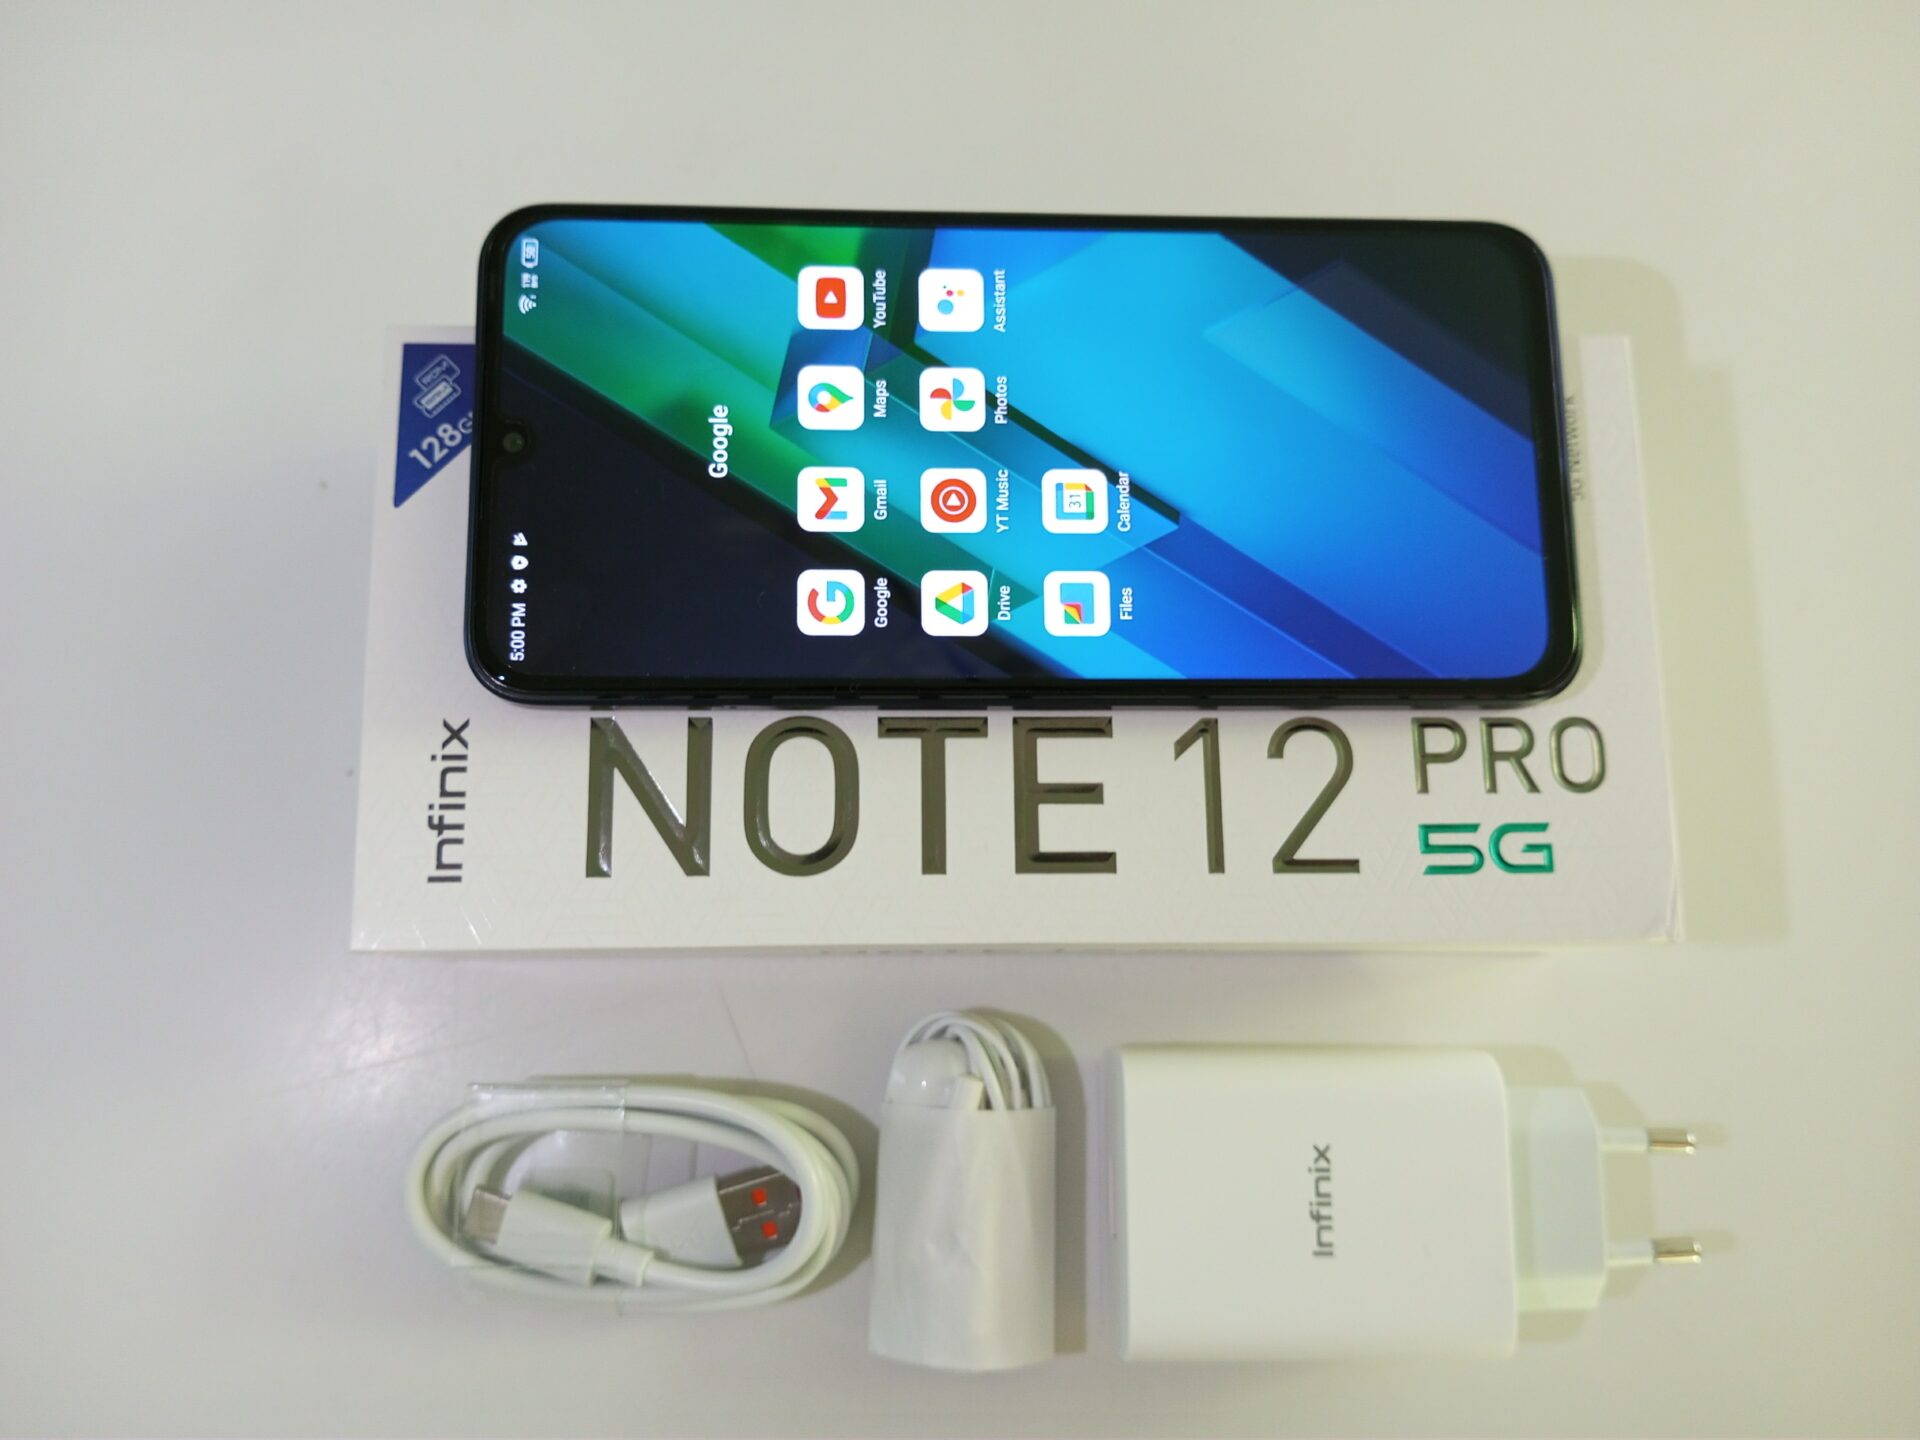 Infinix Note 12 Pro & Note 12 Pro 5G - What Should You Choose